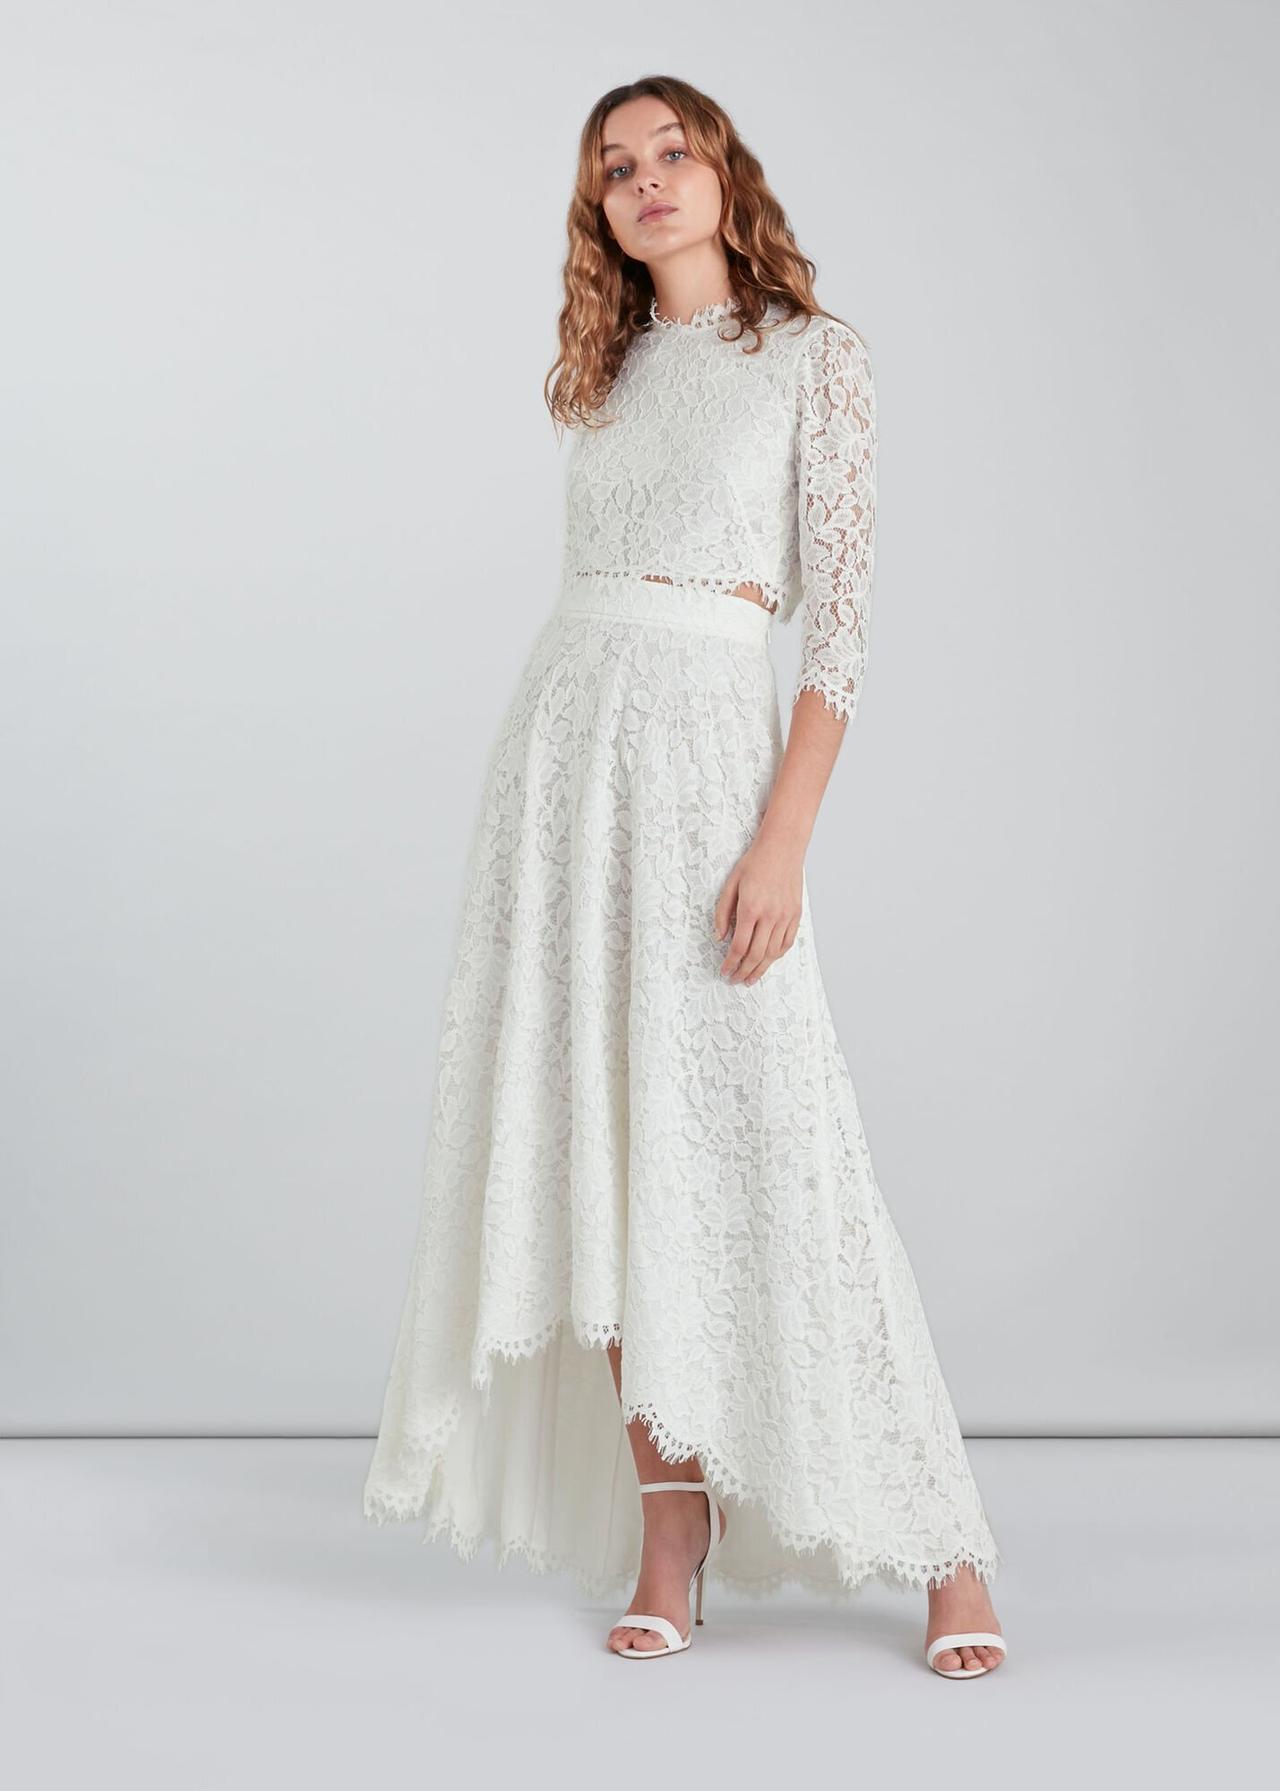 Model wearing a lace wedding co-ord